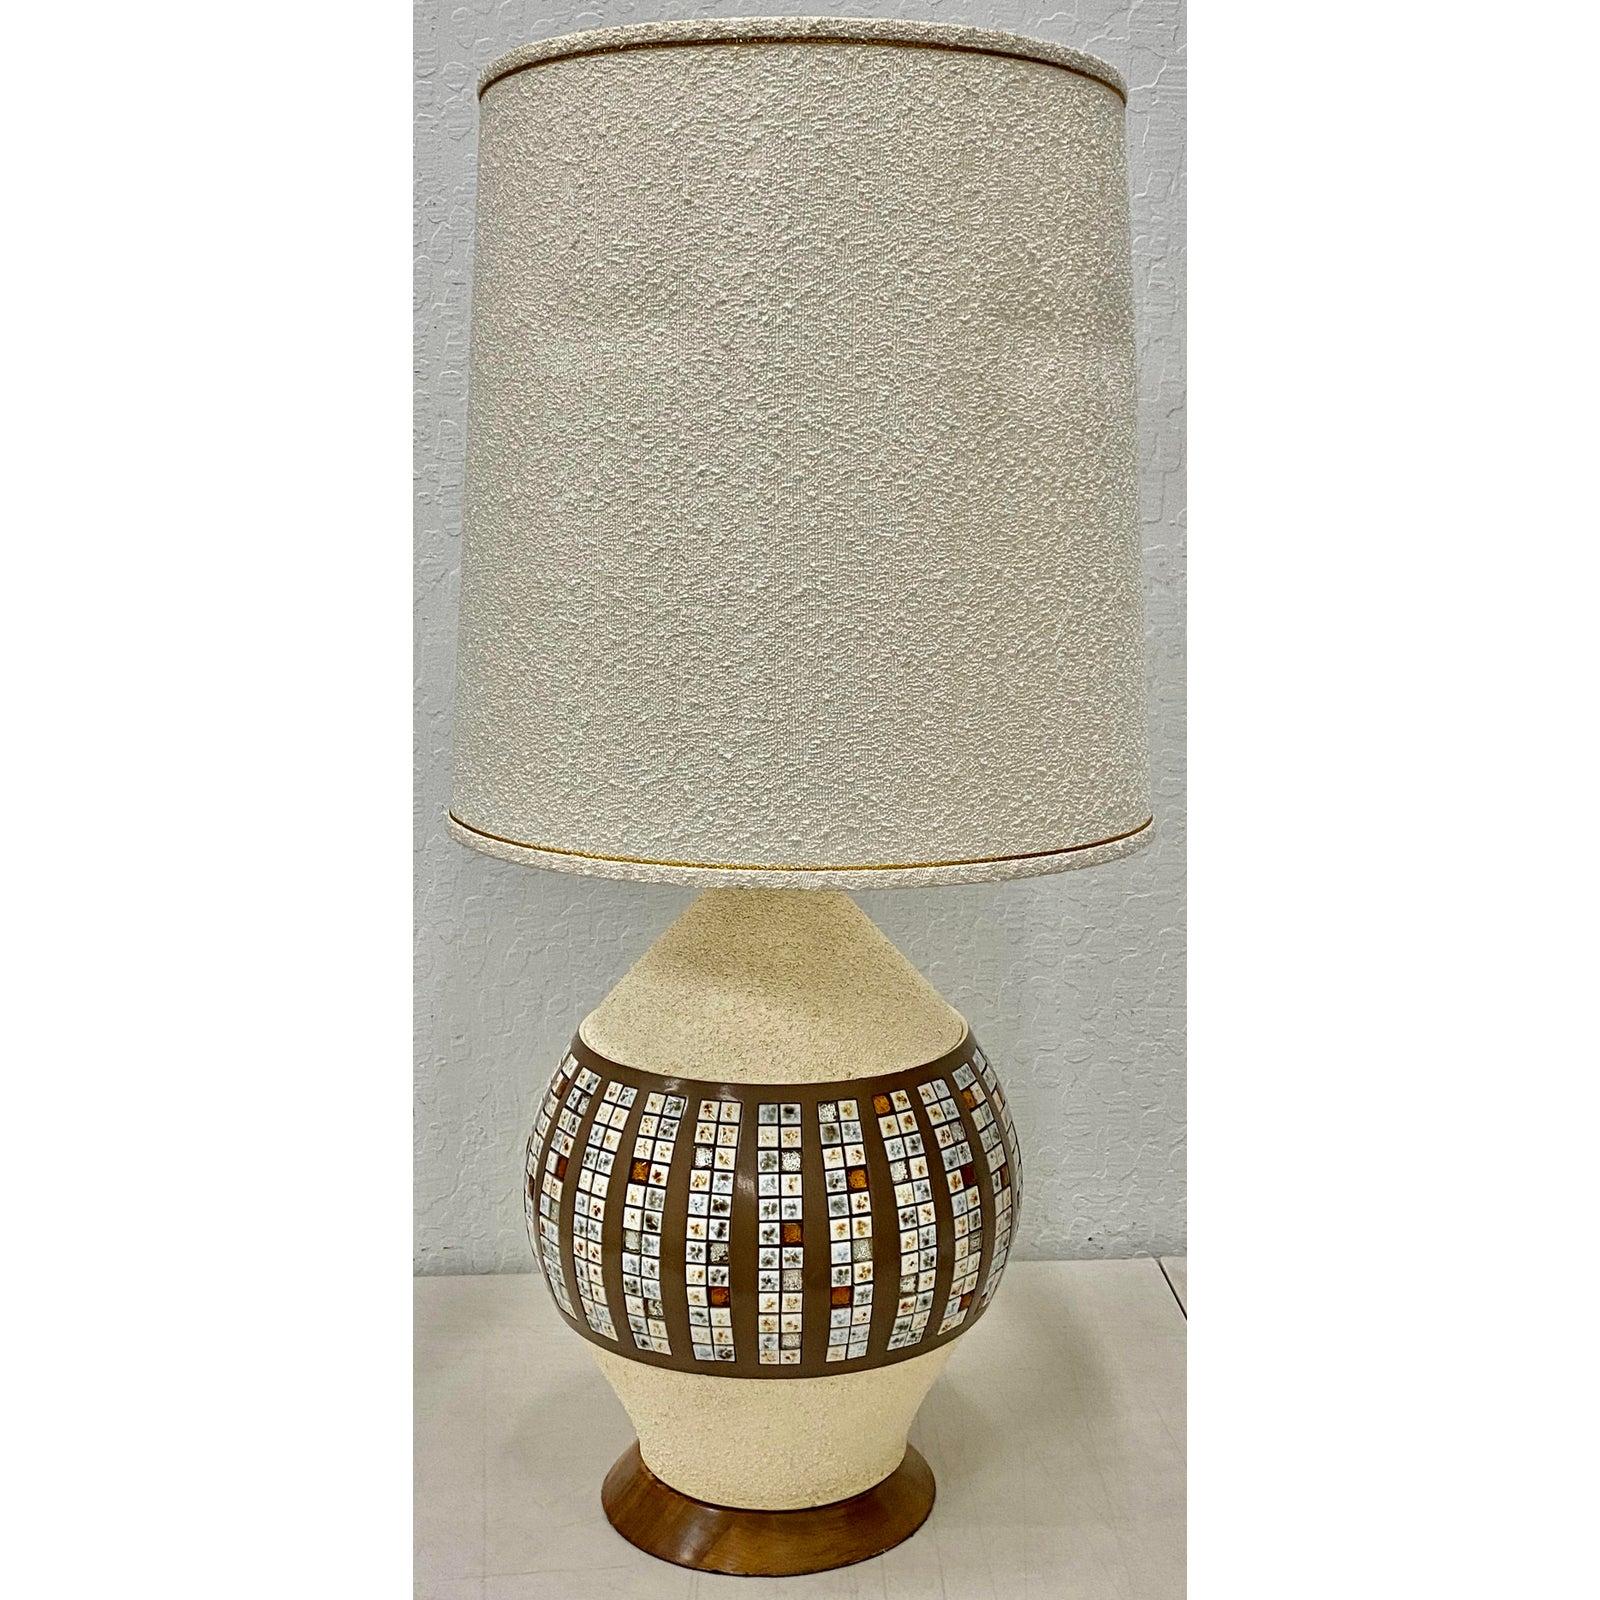 Midcentury Quartite Creative Corp ceramic tile lamp, circa 1963

Classic Mid-Century Modern Arts & Crafts style ceramic lamp with glazed tiles on a walnut base.

The original shade is lightly distressed.

Size: 8